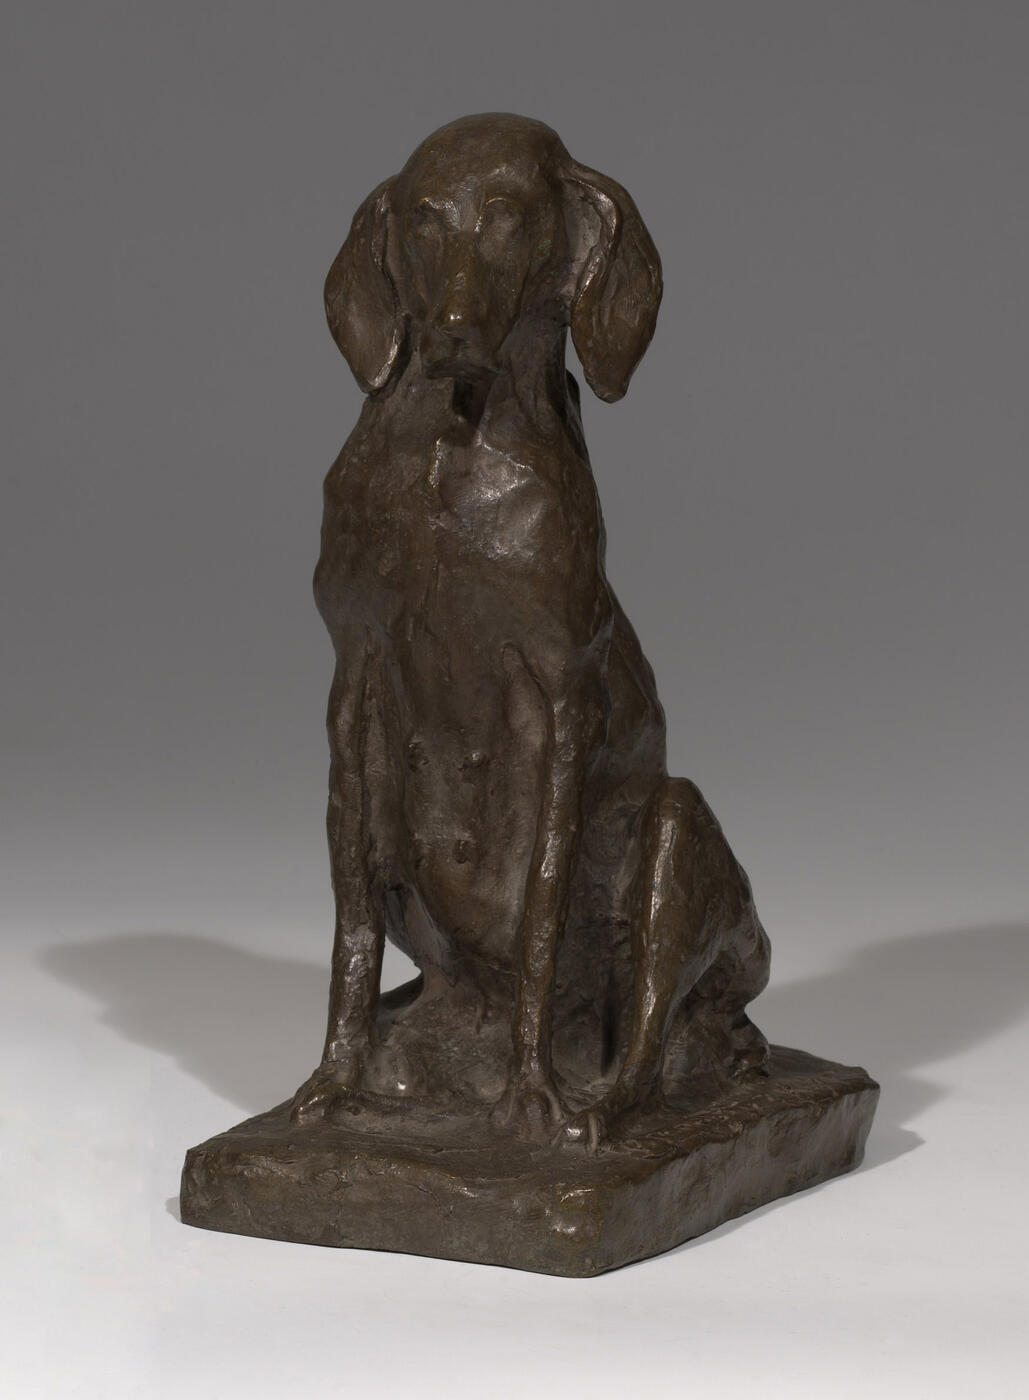 A Bronze model of a seated Dog